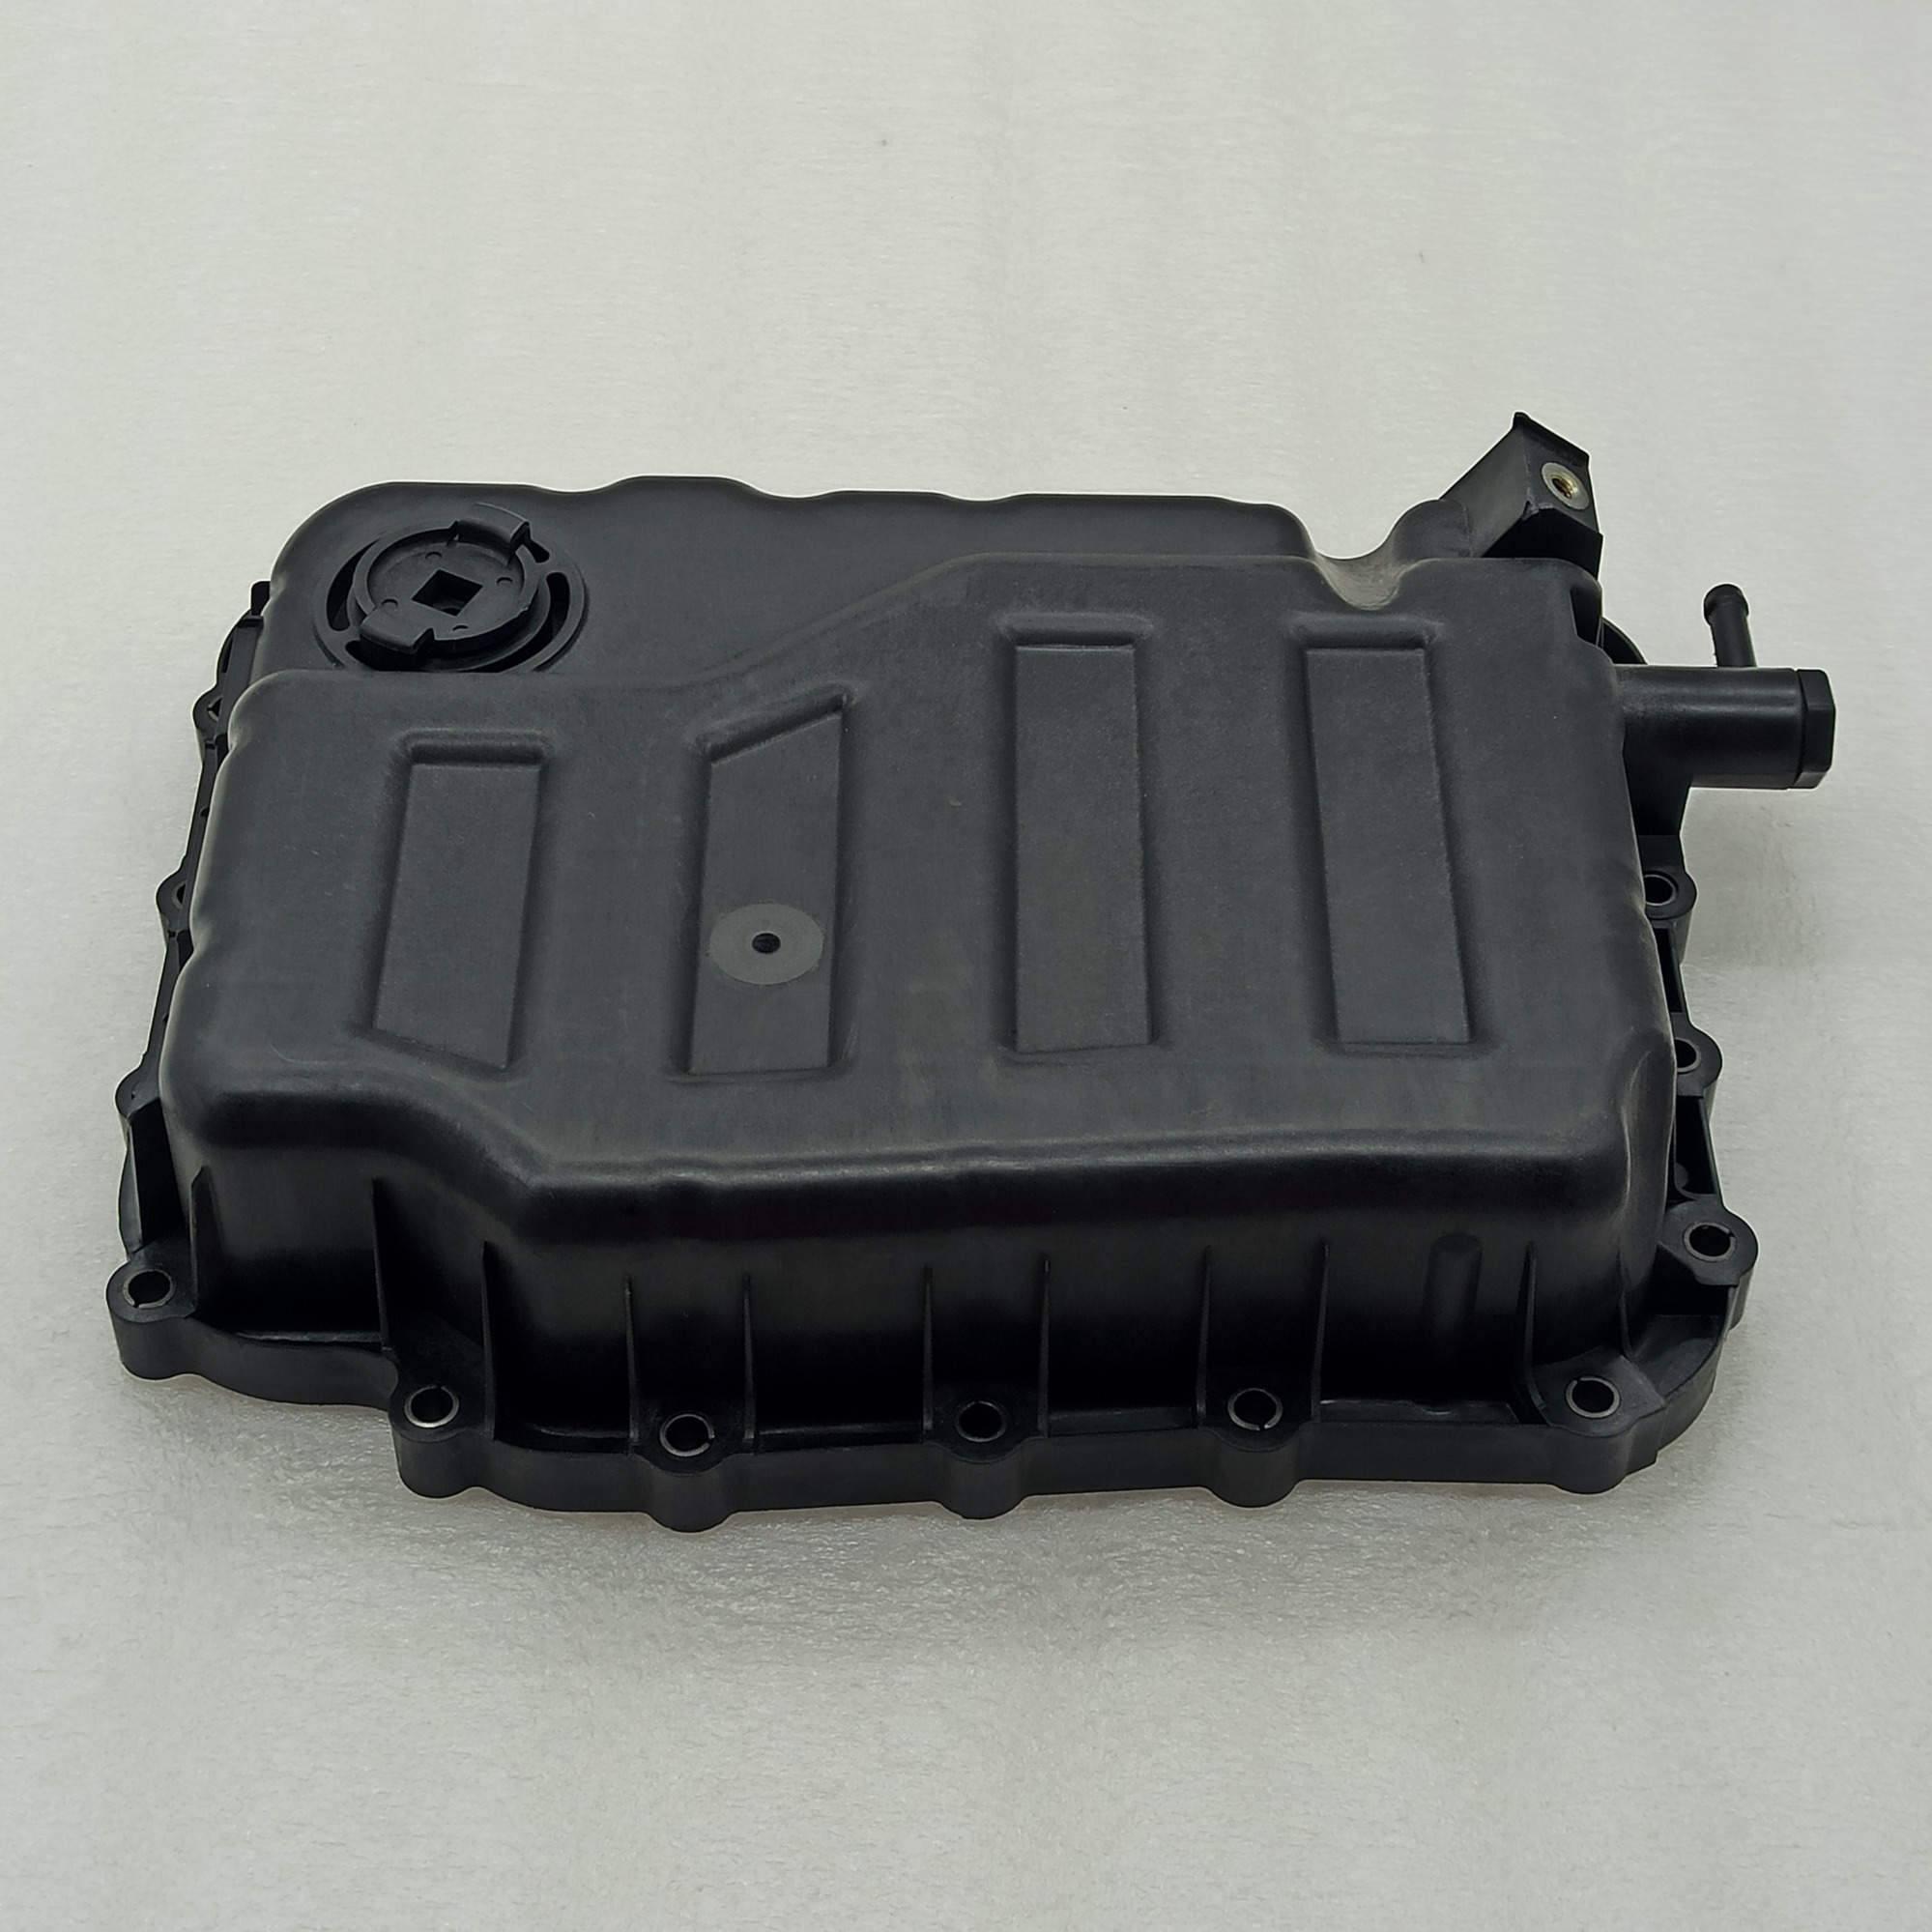 6HP24-0005-OEM 45280P 3B750 Oil pan automatic transmission parts for repair or repalce or test